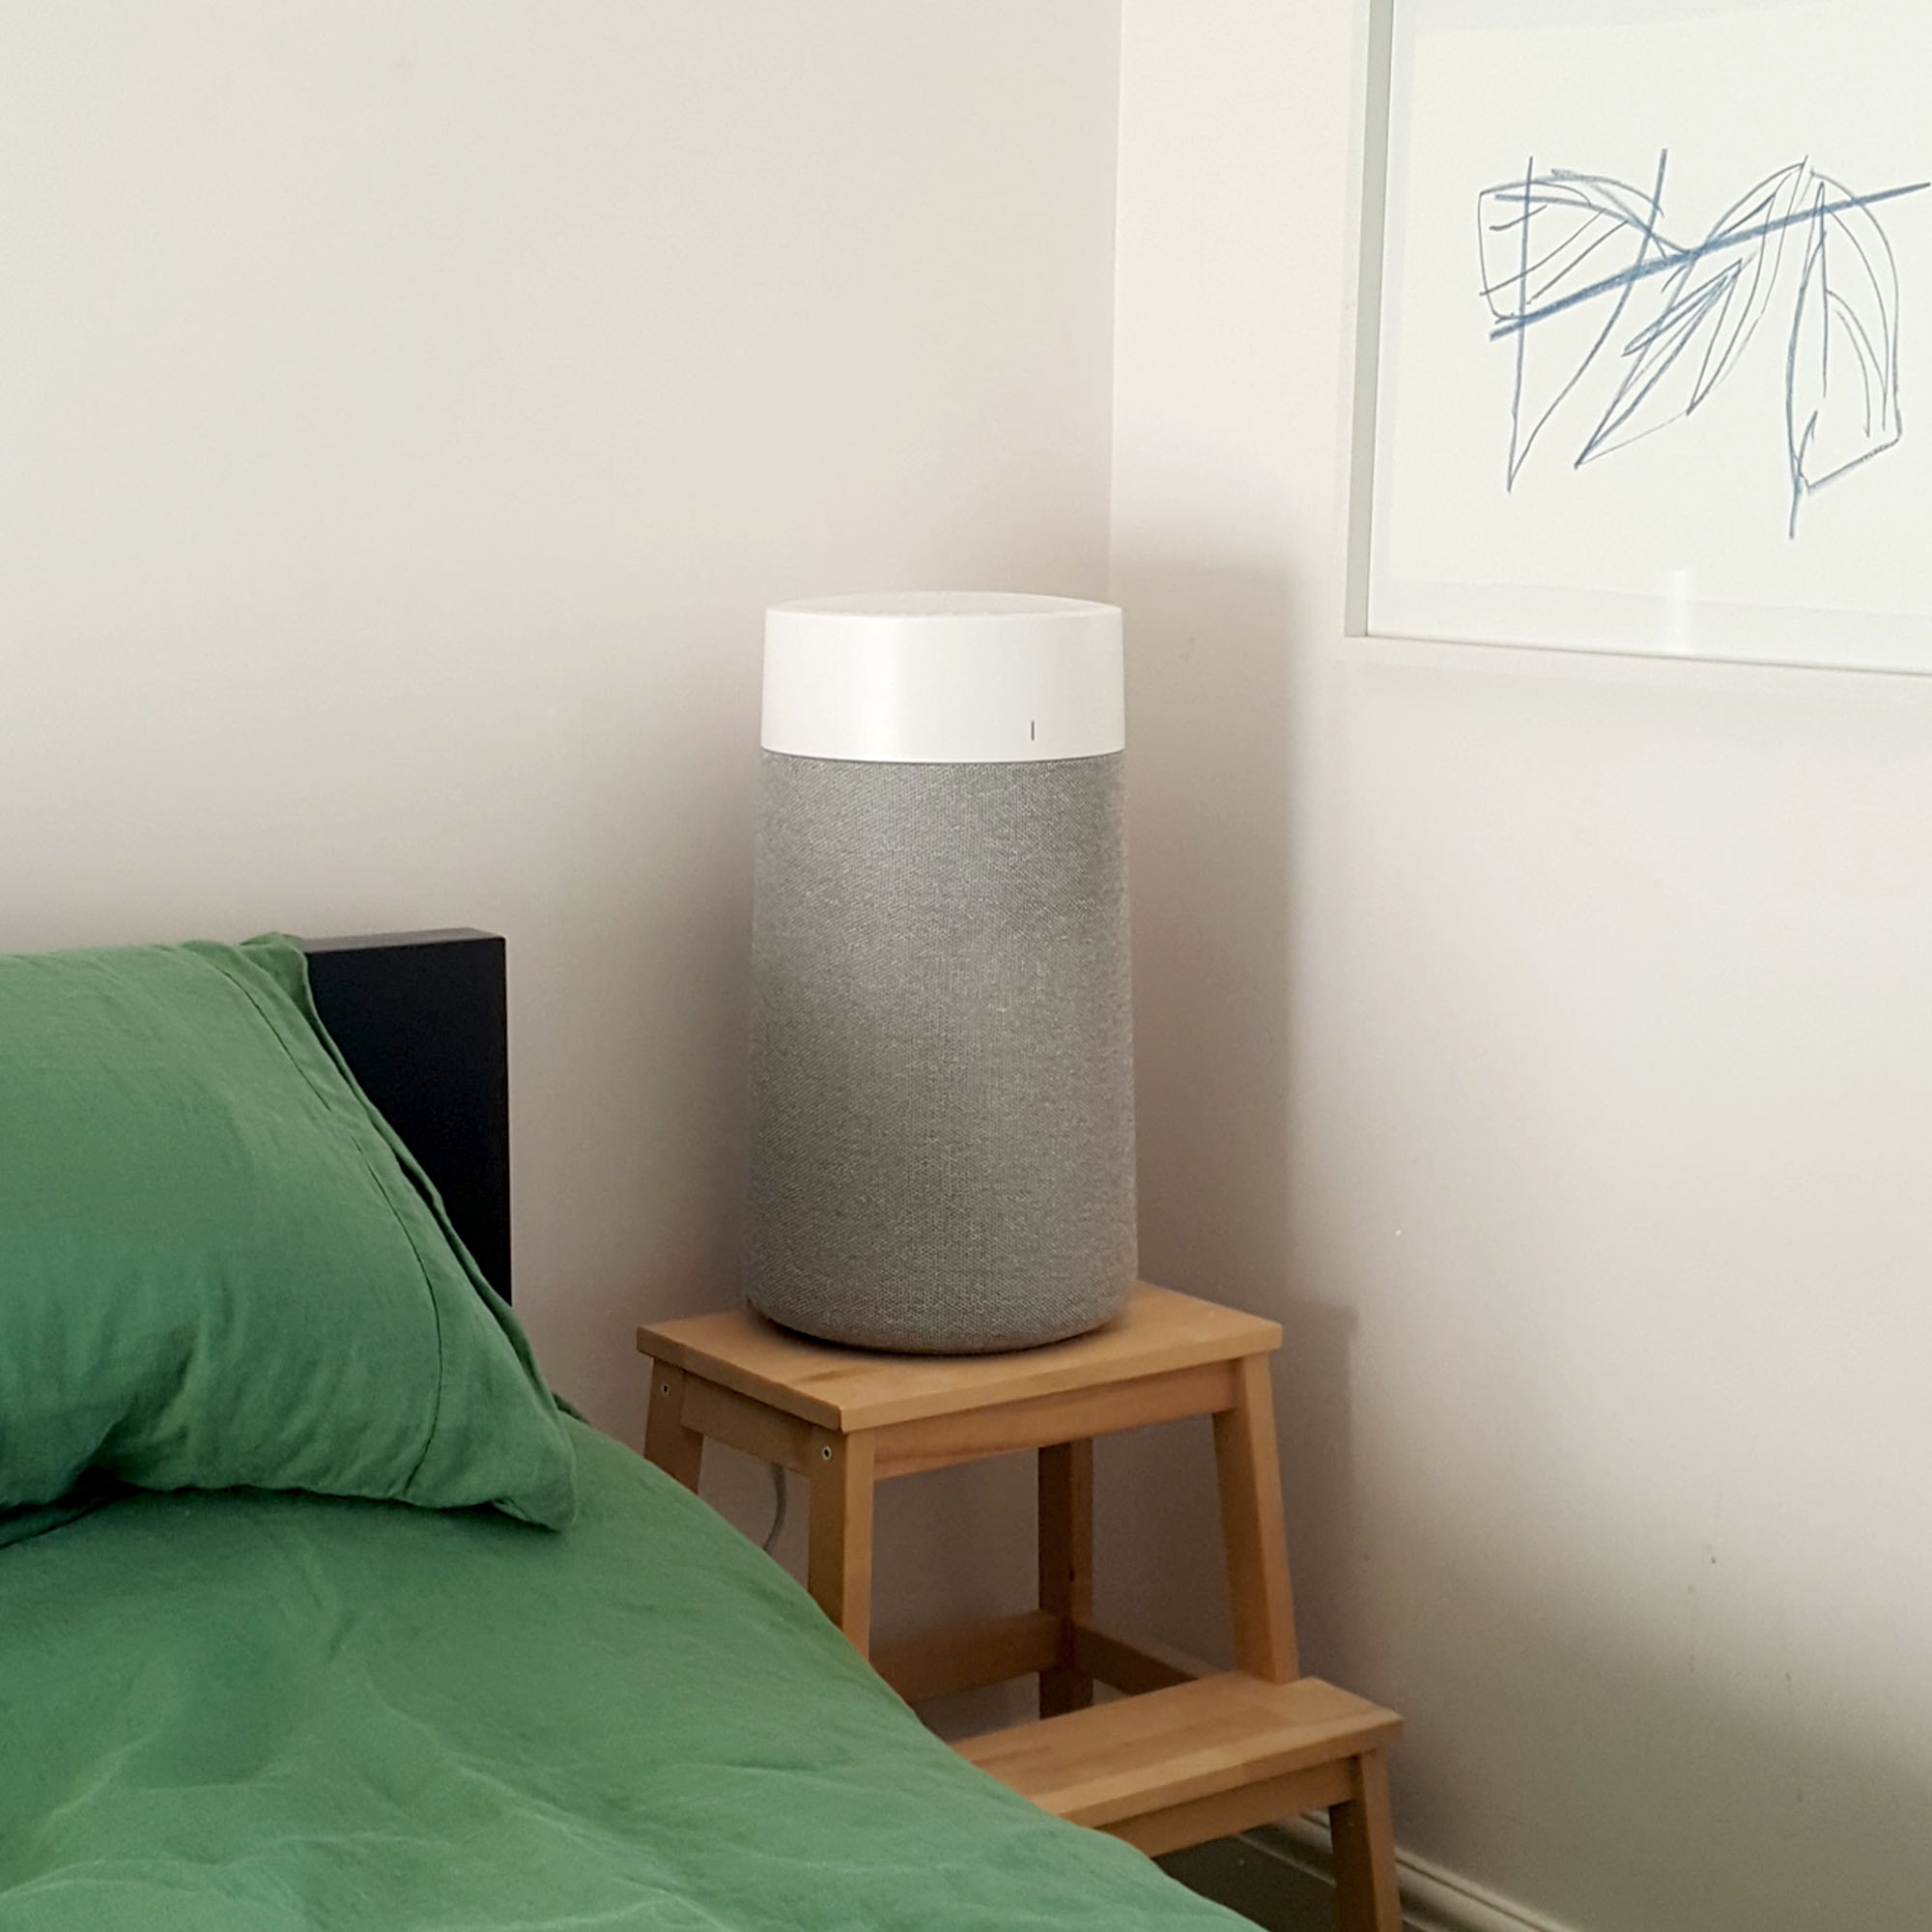 The Blueair Blue Max 3250i Air Purifier by the side of a bed with green linen bedding